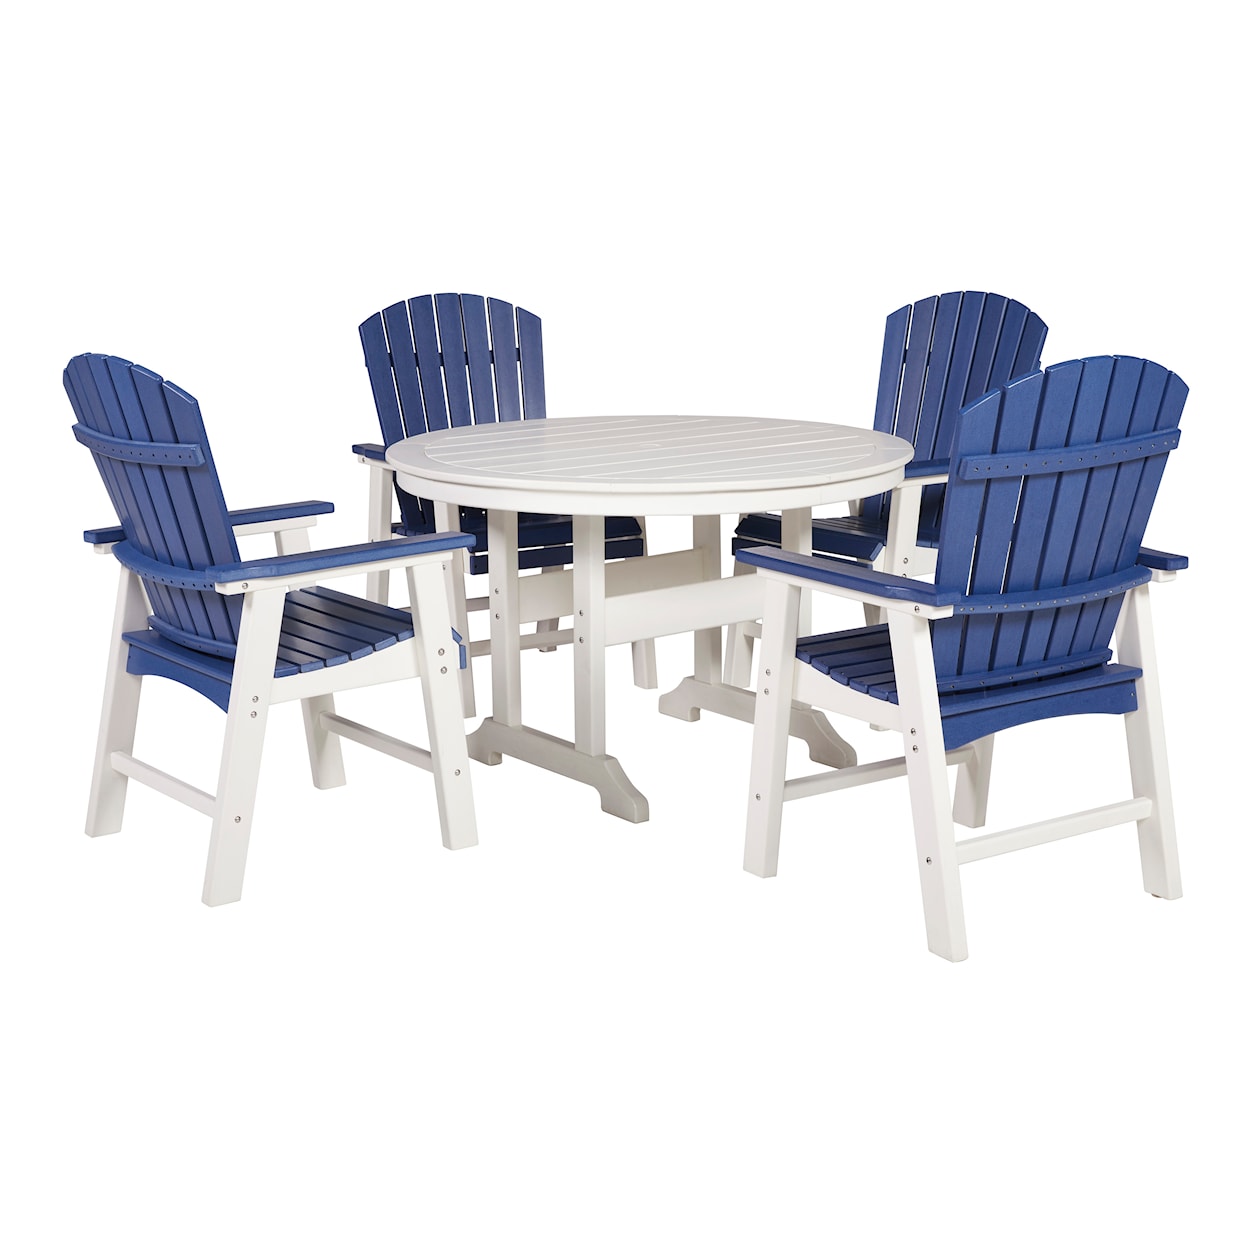 Benchcraft Crescent Luxe 5-Piece Dining Set